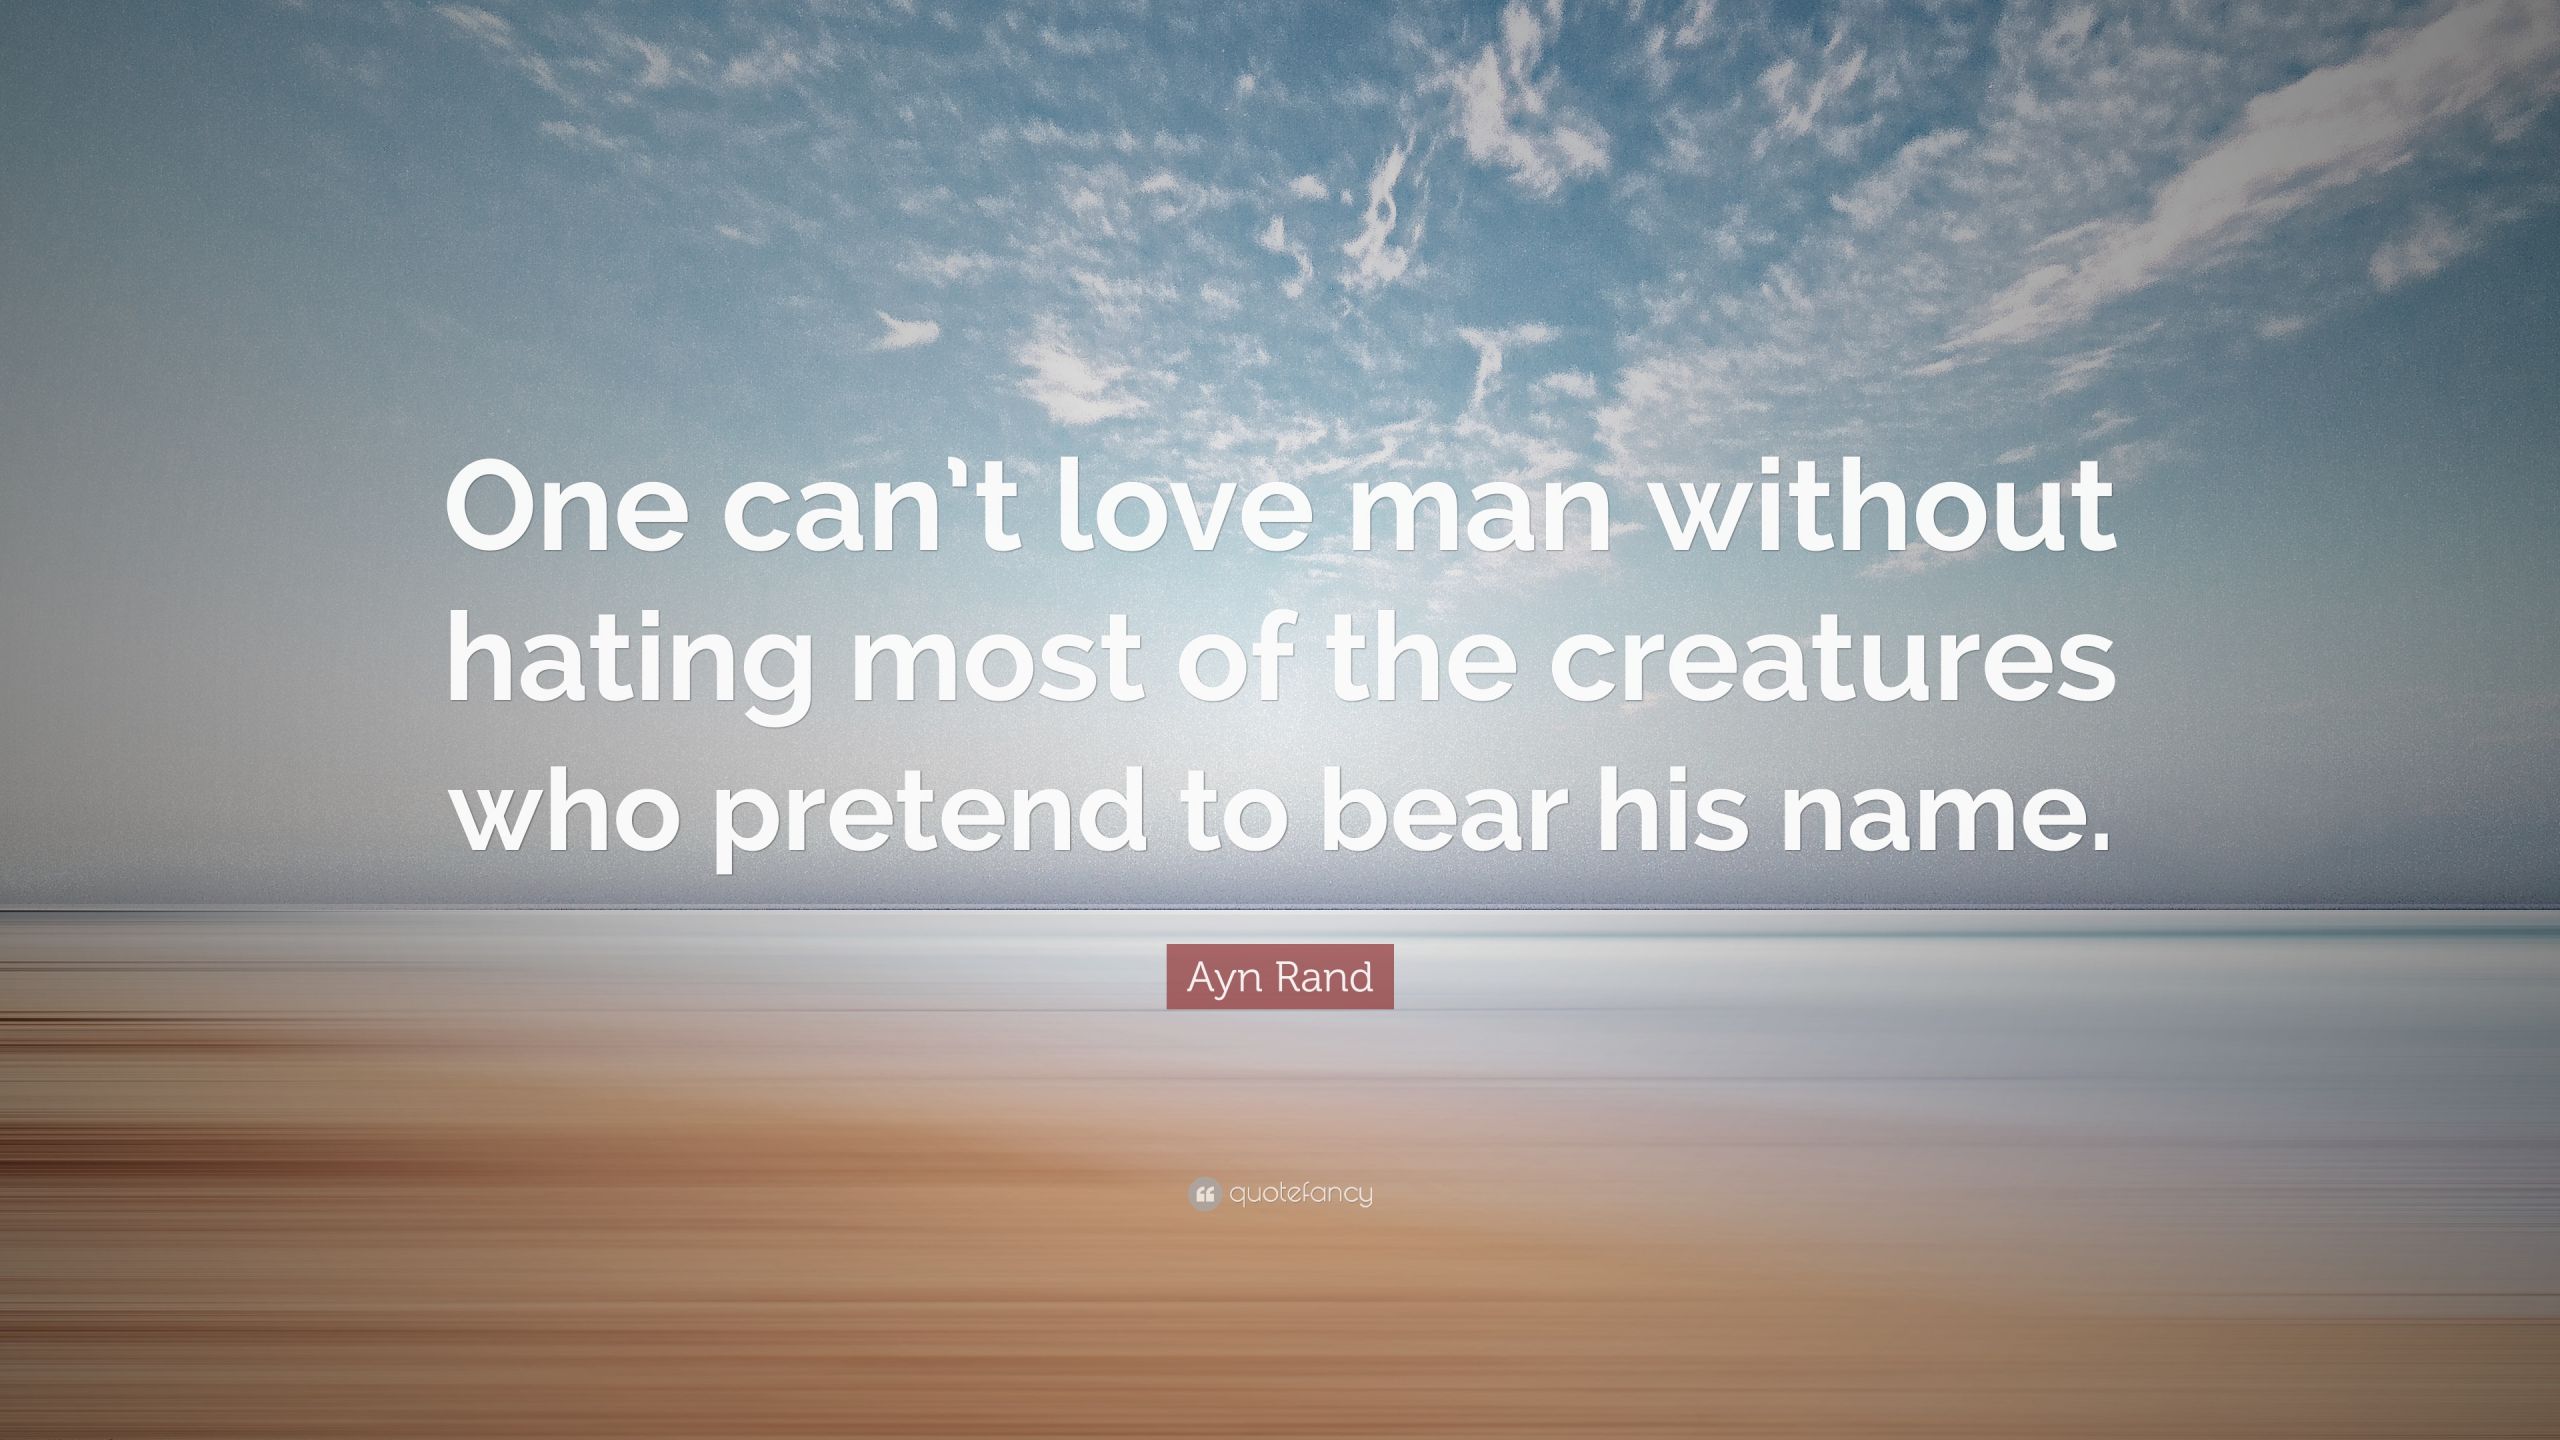 Ayn Rand Love Quotes
 Ayn Rand Quote “ e can’t love man without hating most of